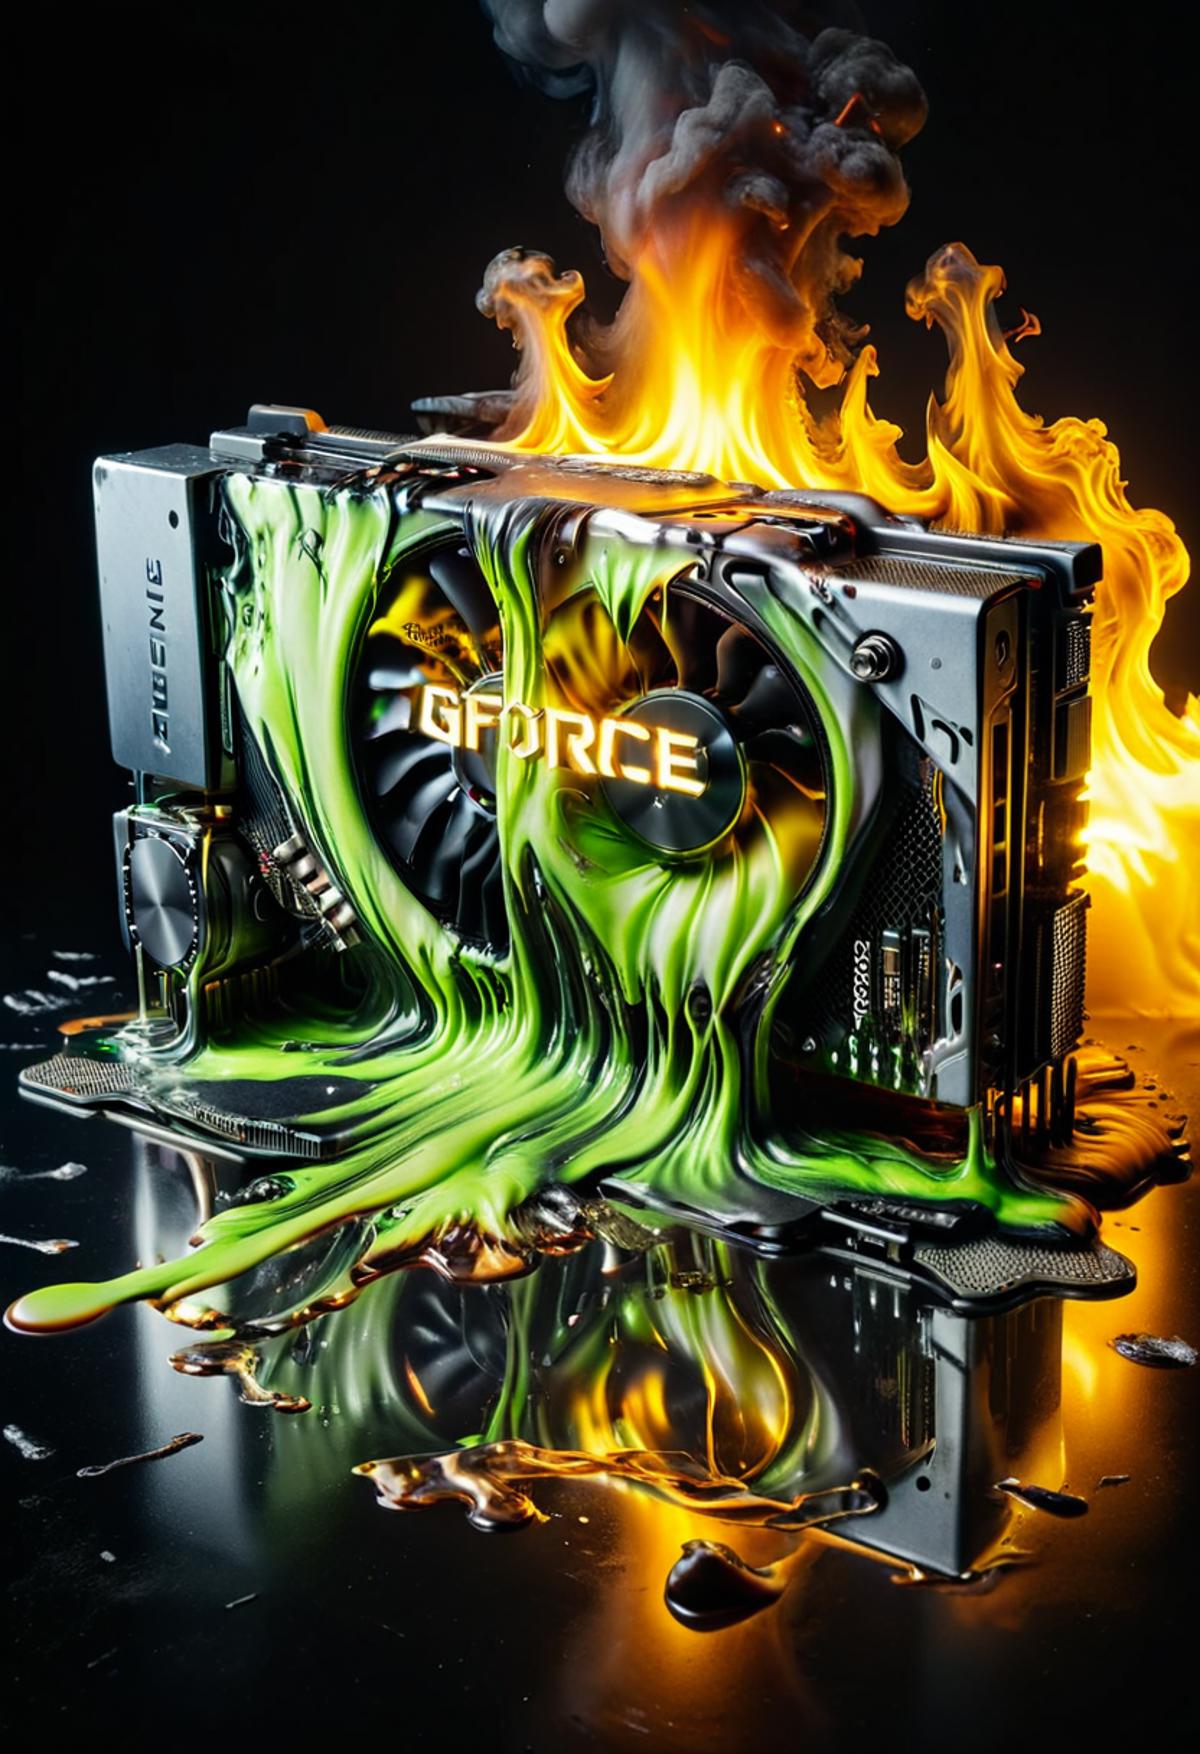 A Fire and Liquid-Covered Computer with a Gaming Logo